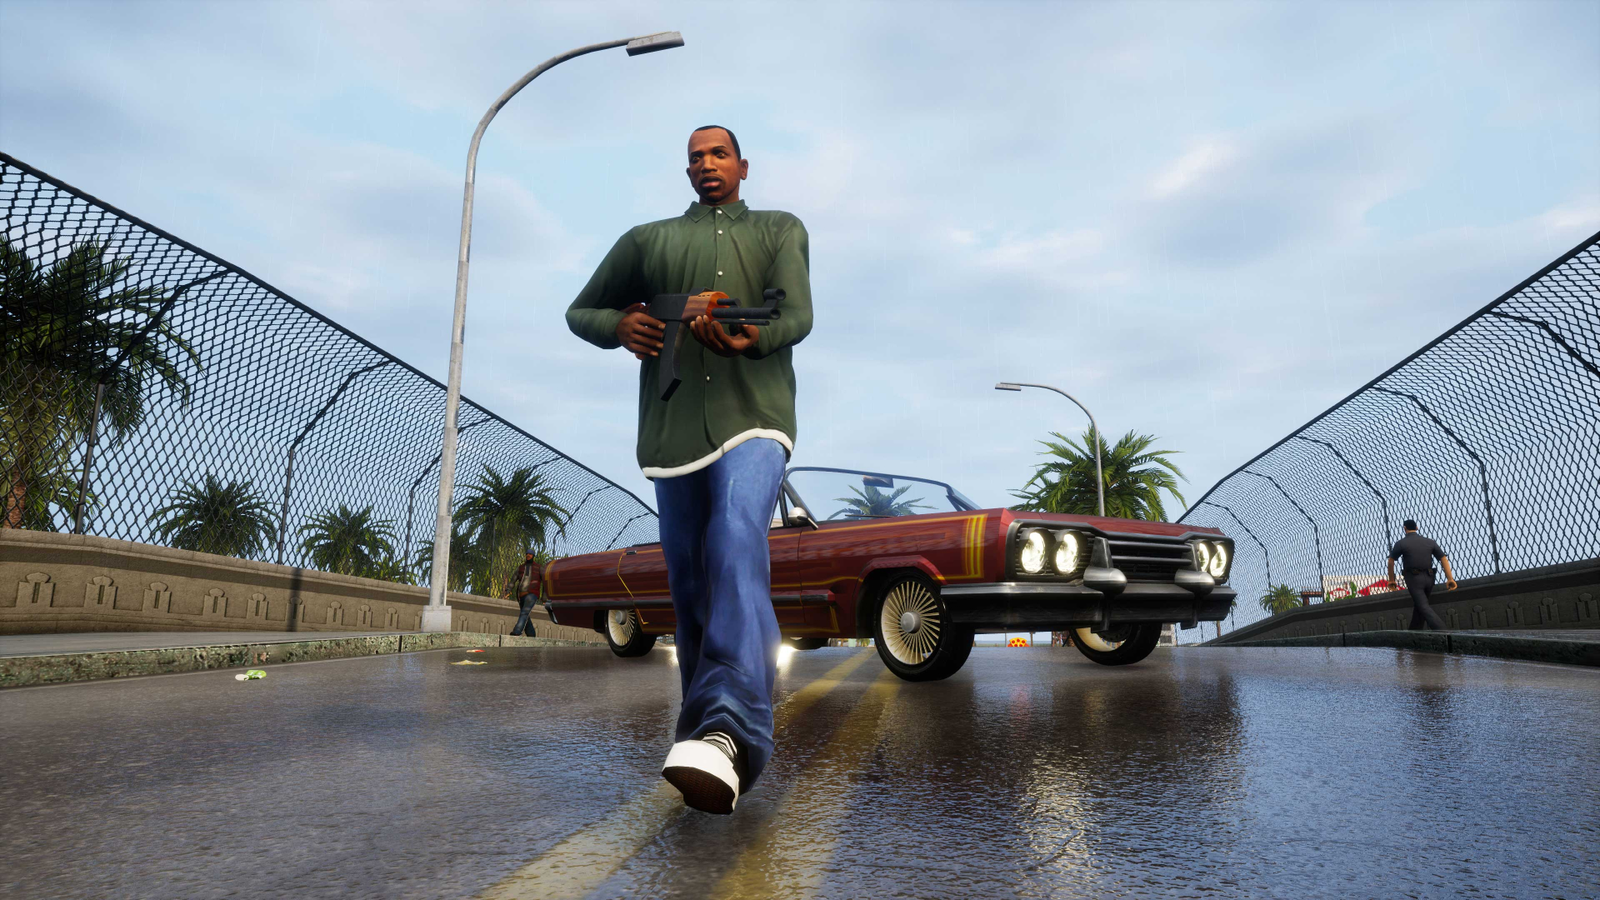 Netflix Is Bringing The Remastered GTA Trilogy To Phones